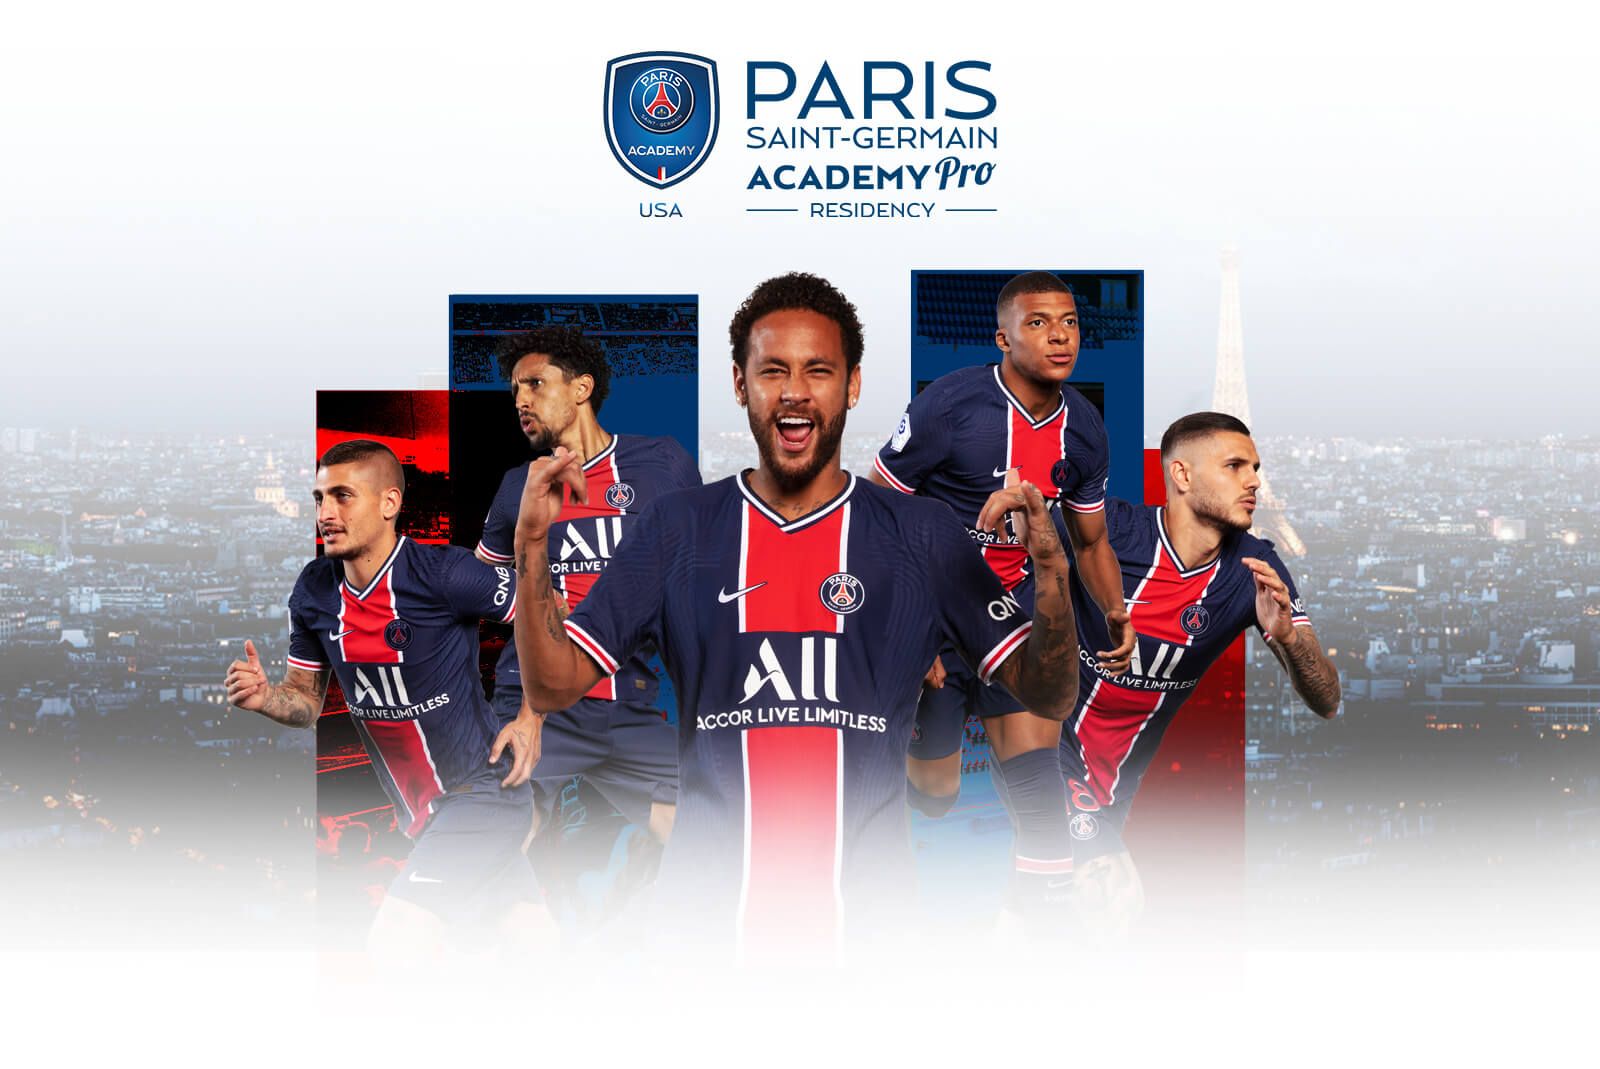 New Wallpaper And Zoom Background Just Released!. Paris Saint Germain Academy USA